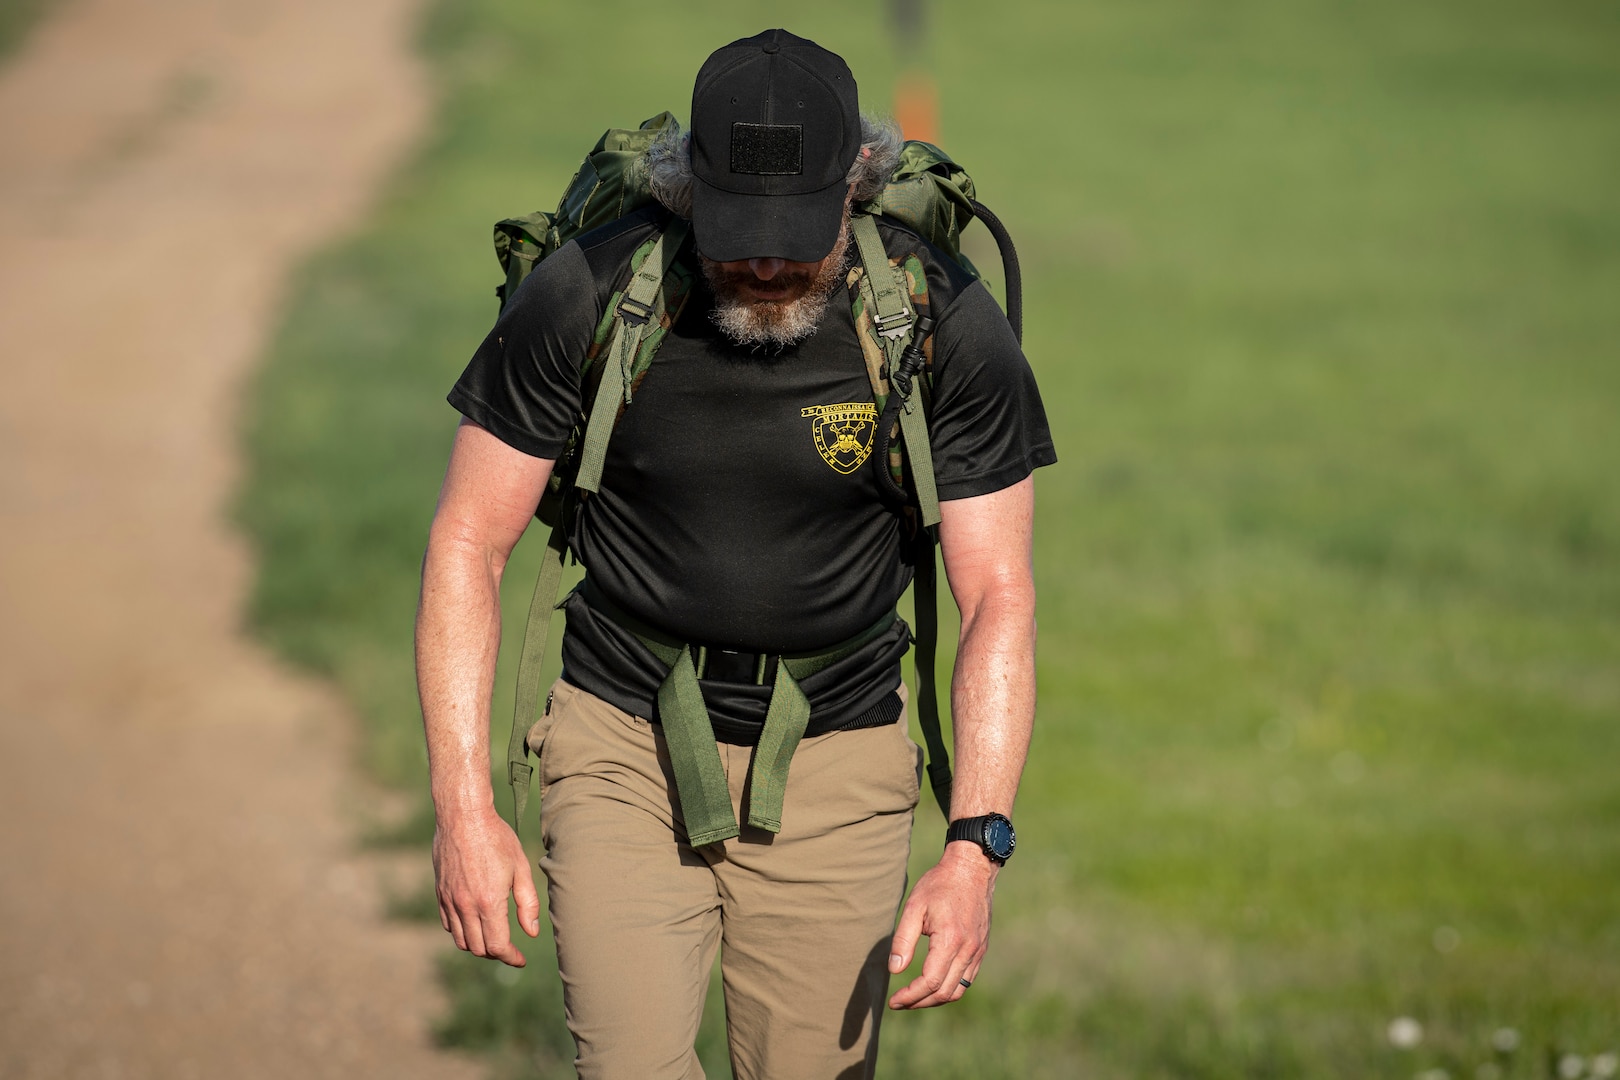 Man rucking with gear